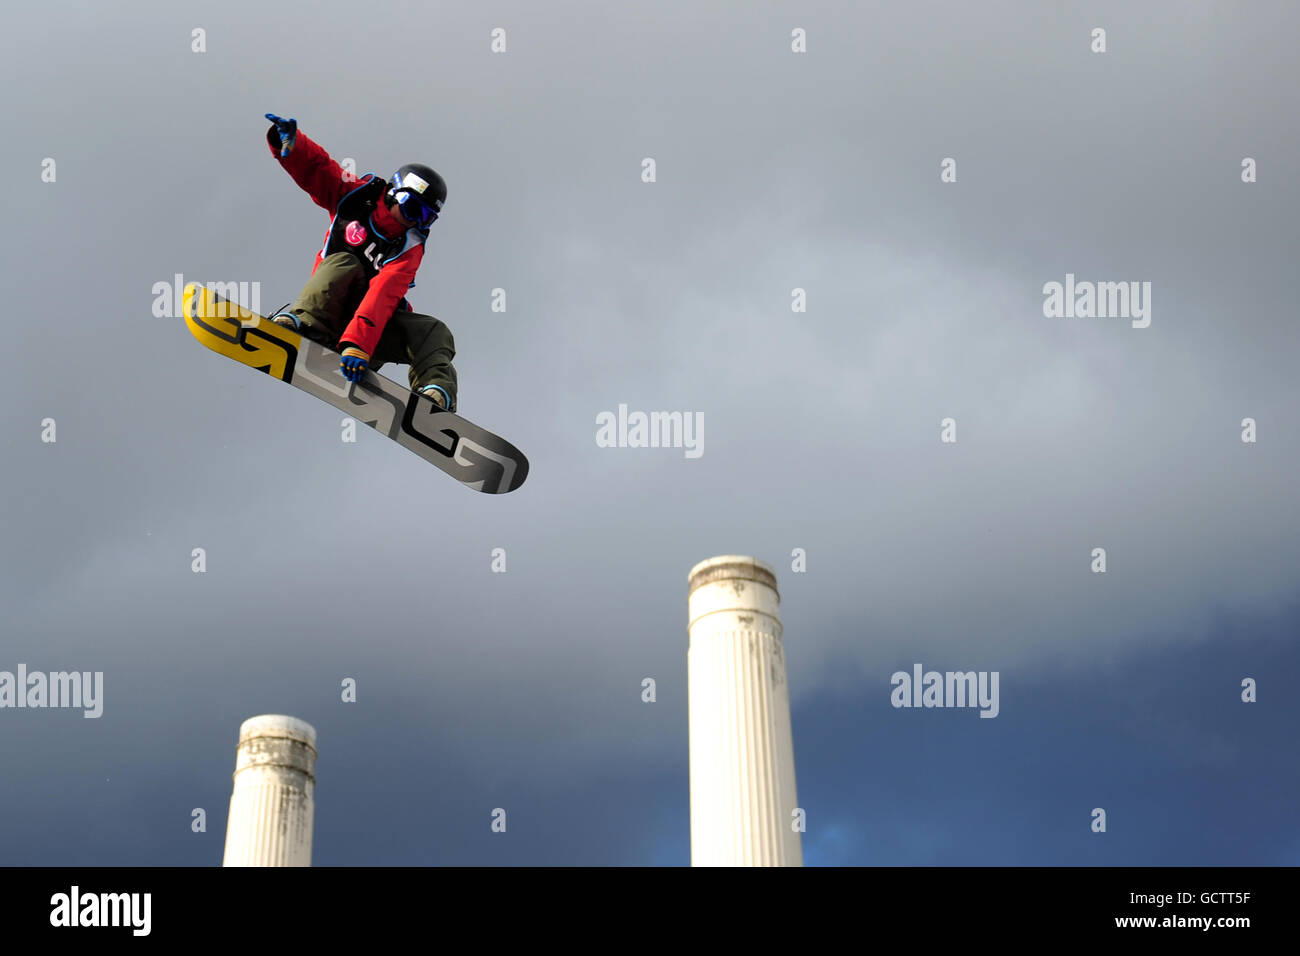 Roope Tonteri of Finland during the LG Snowboard FIS World Cup in London Stock Photo